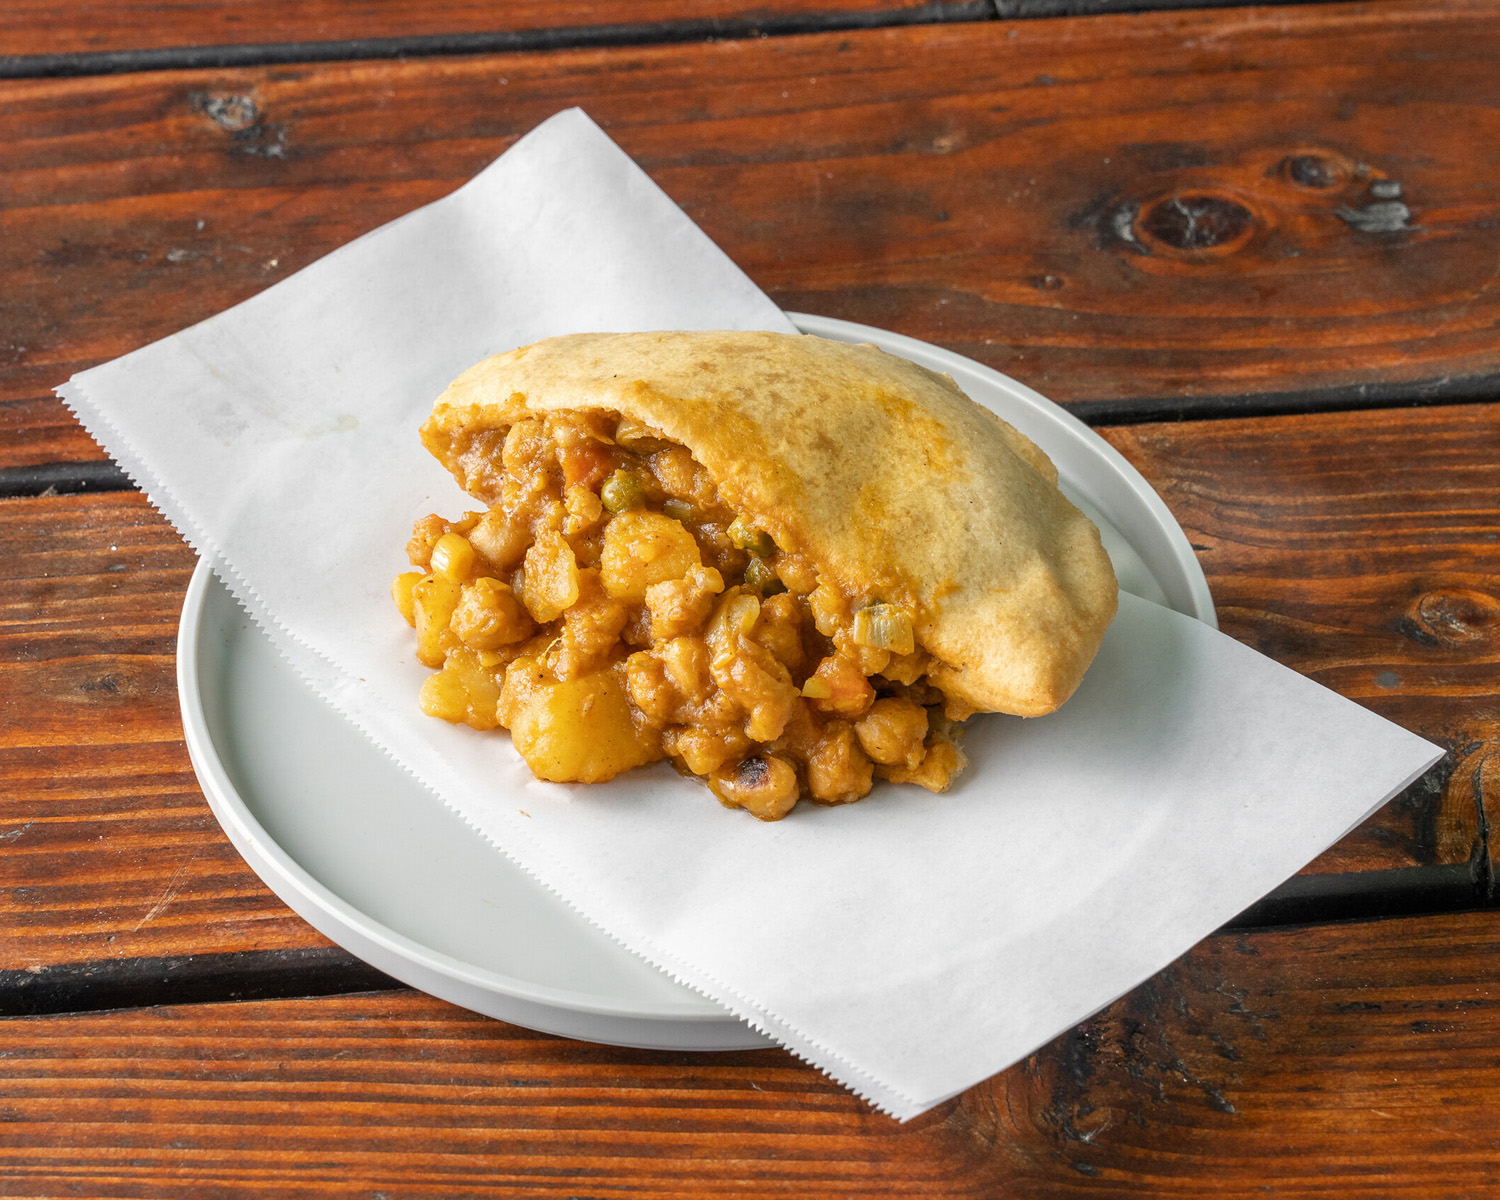 A photo of a vegan bake stuffed with chana aloo curry from Bake on the Run food cart